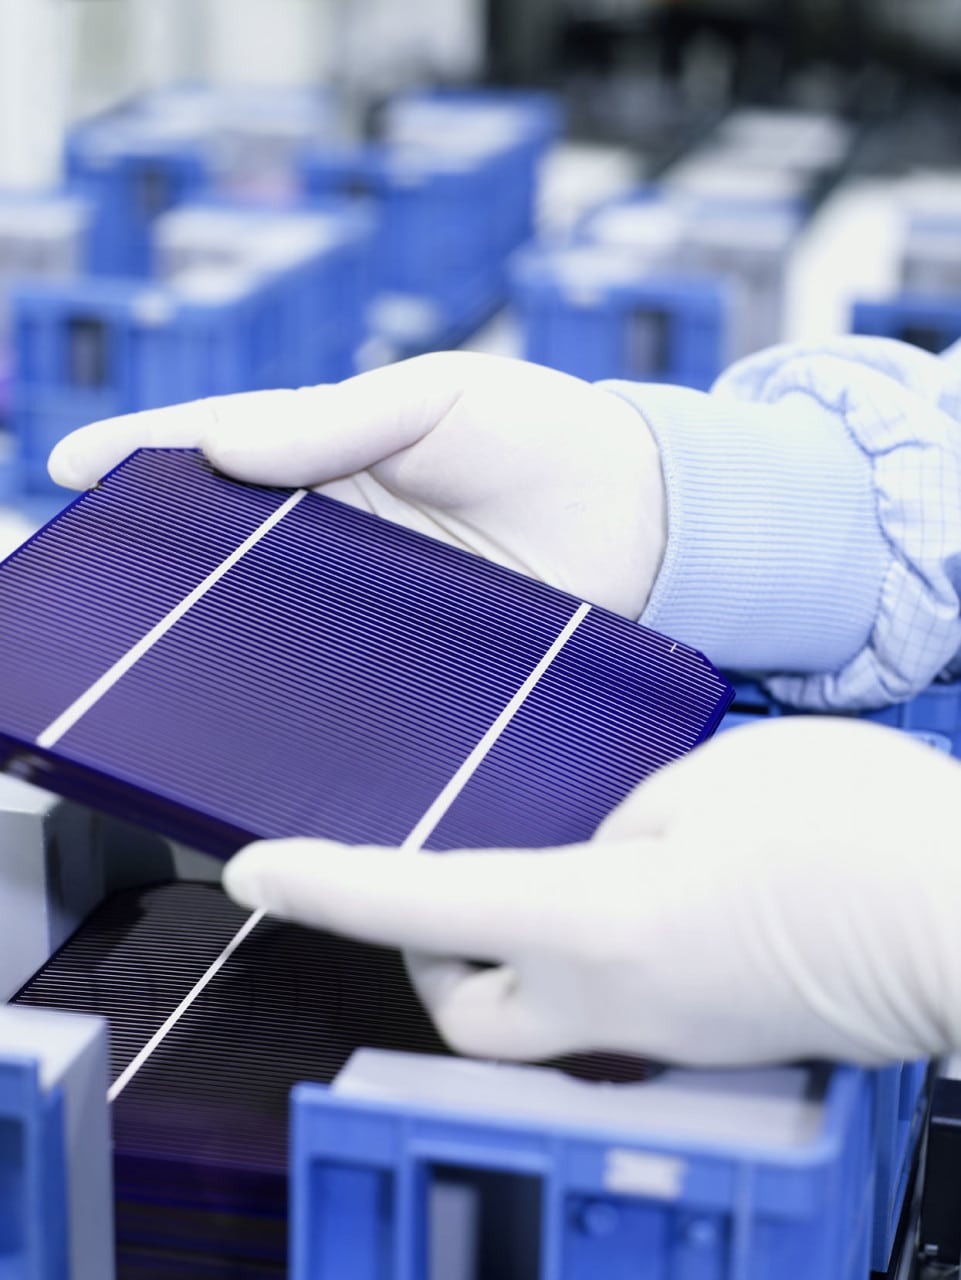  Solar Cells From China Injured U.S. Manufacturers, International Trade Court Rules